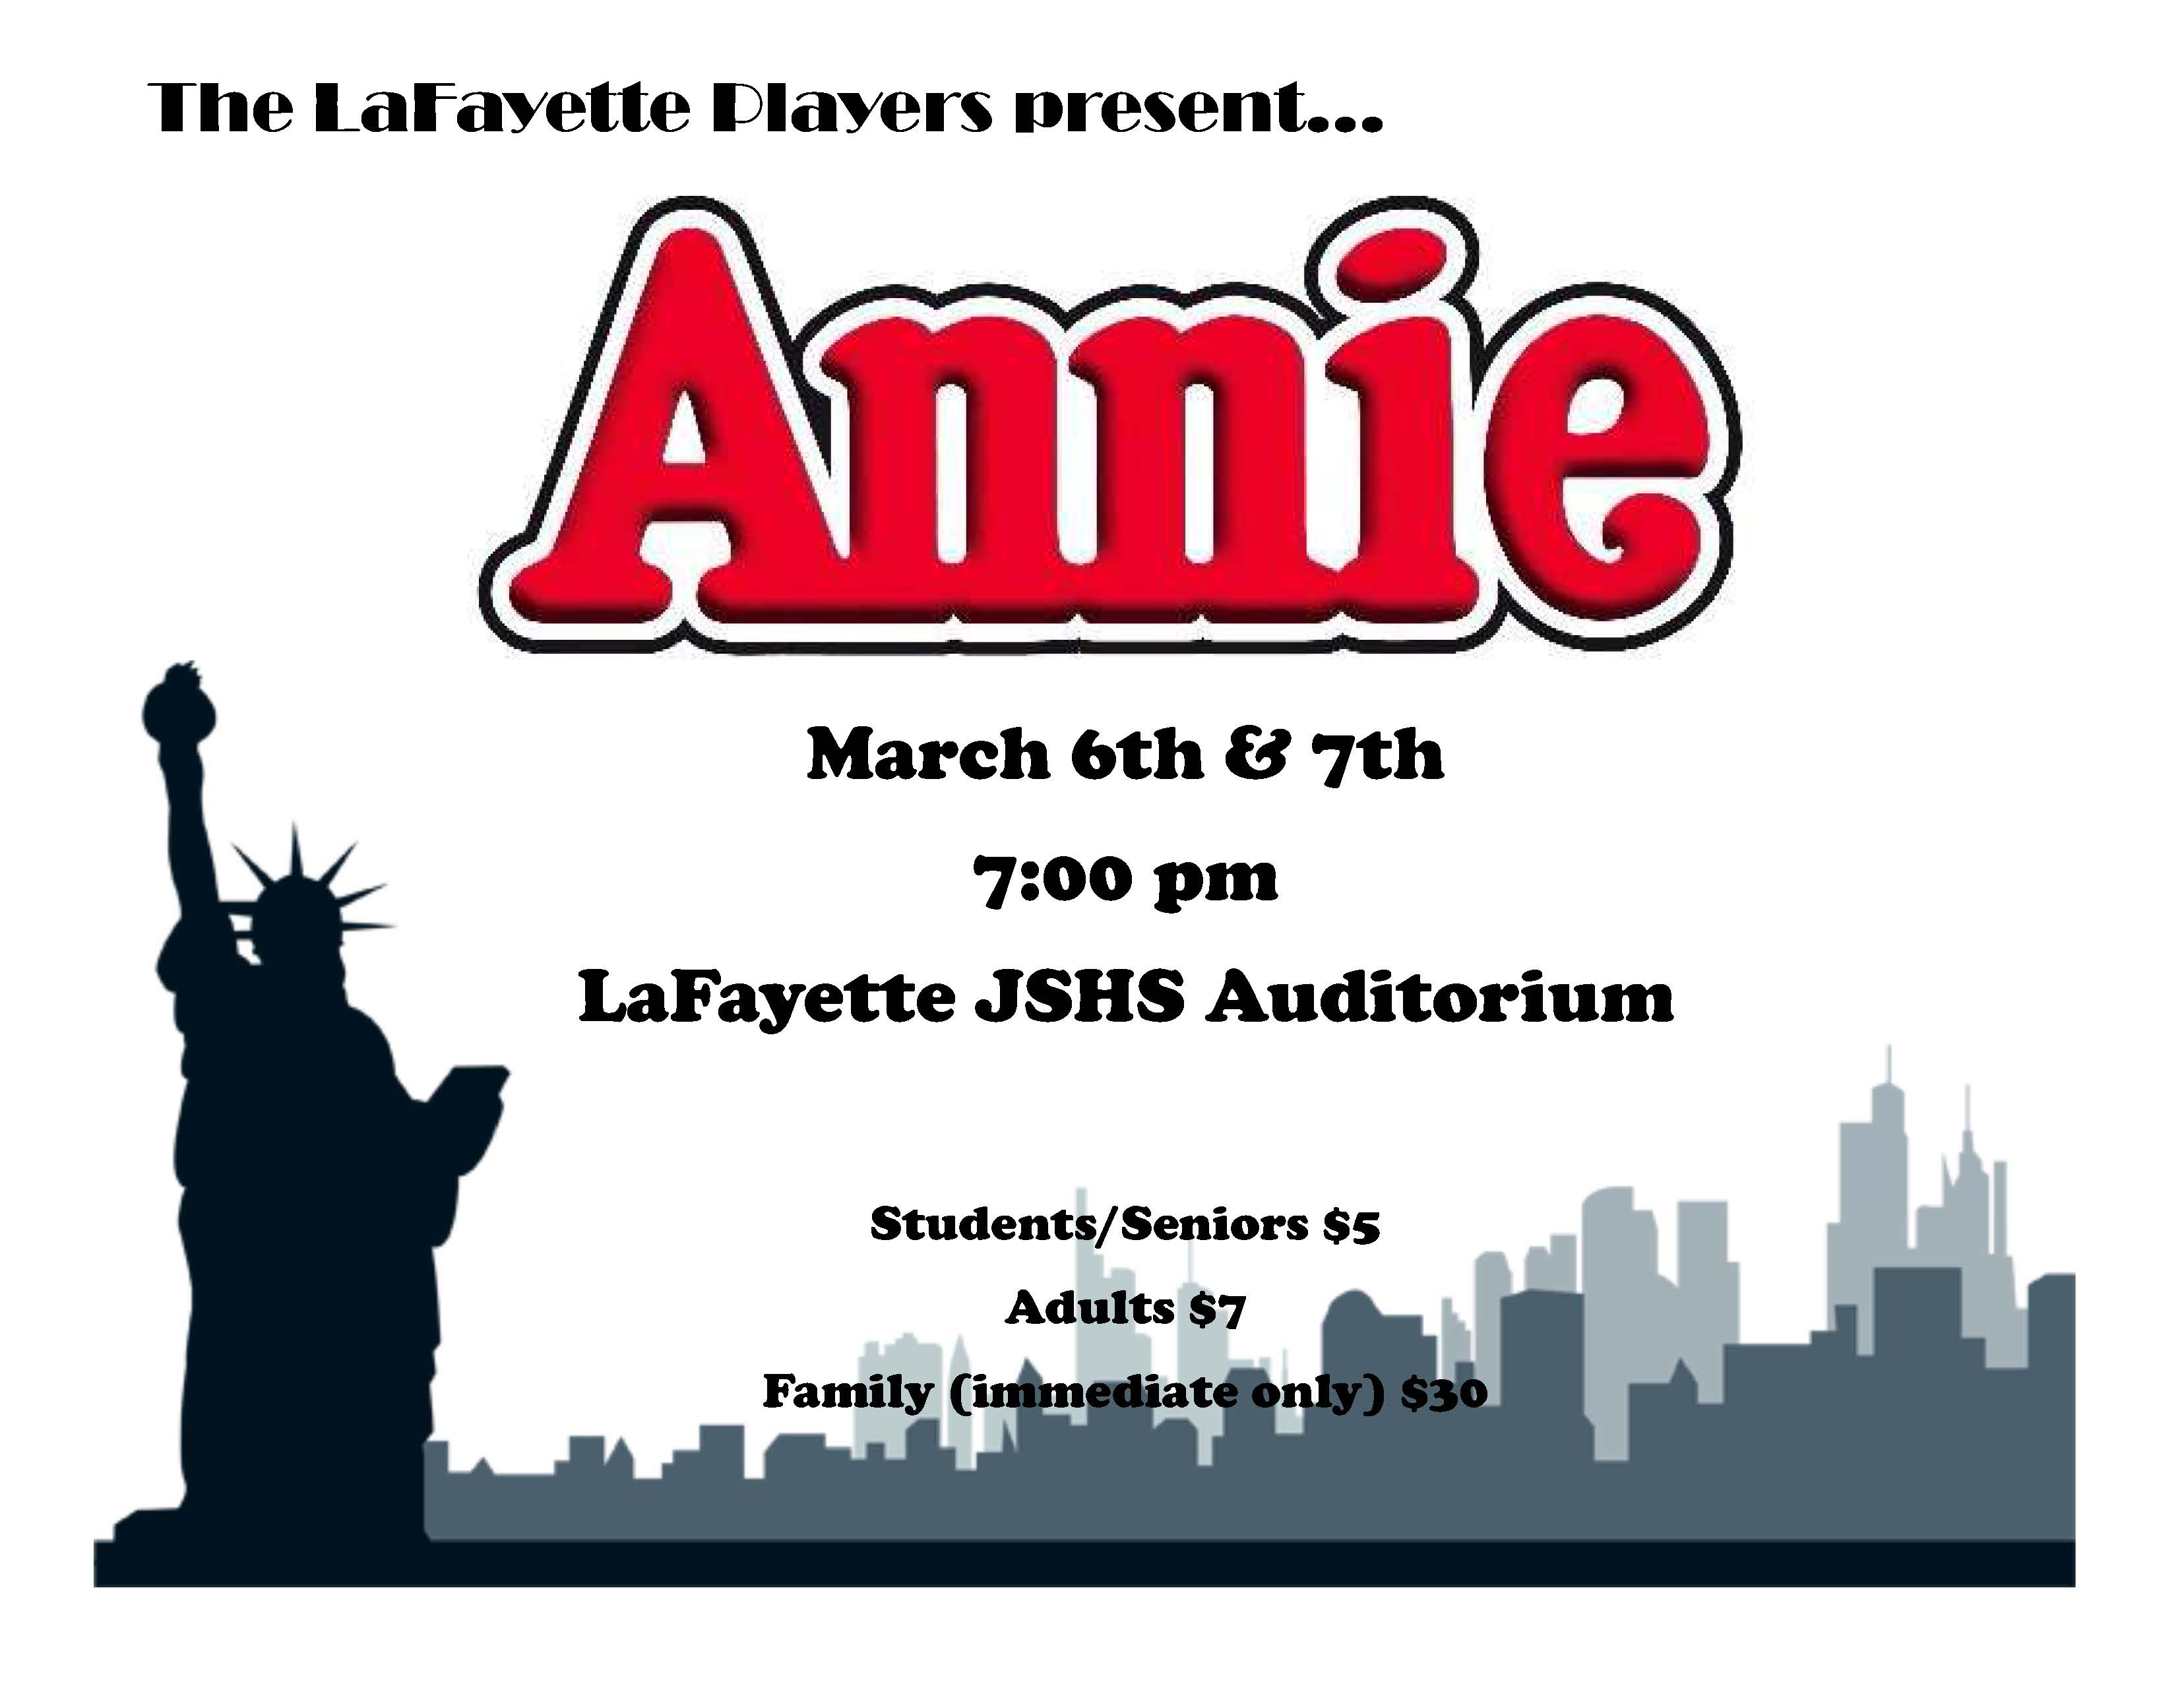 click to view "annie" flyer